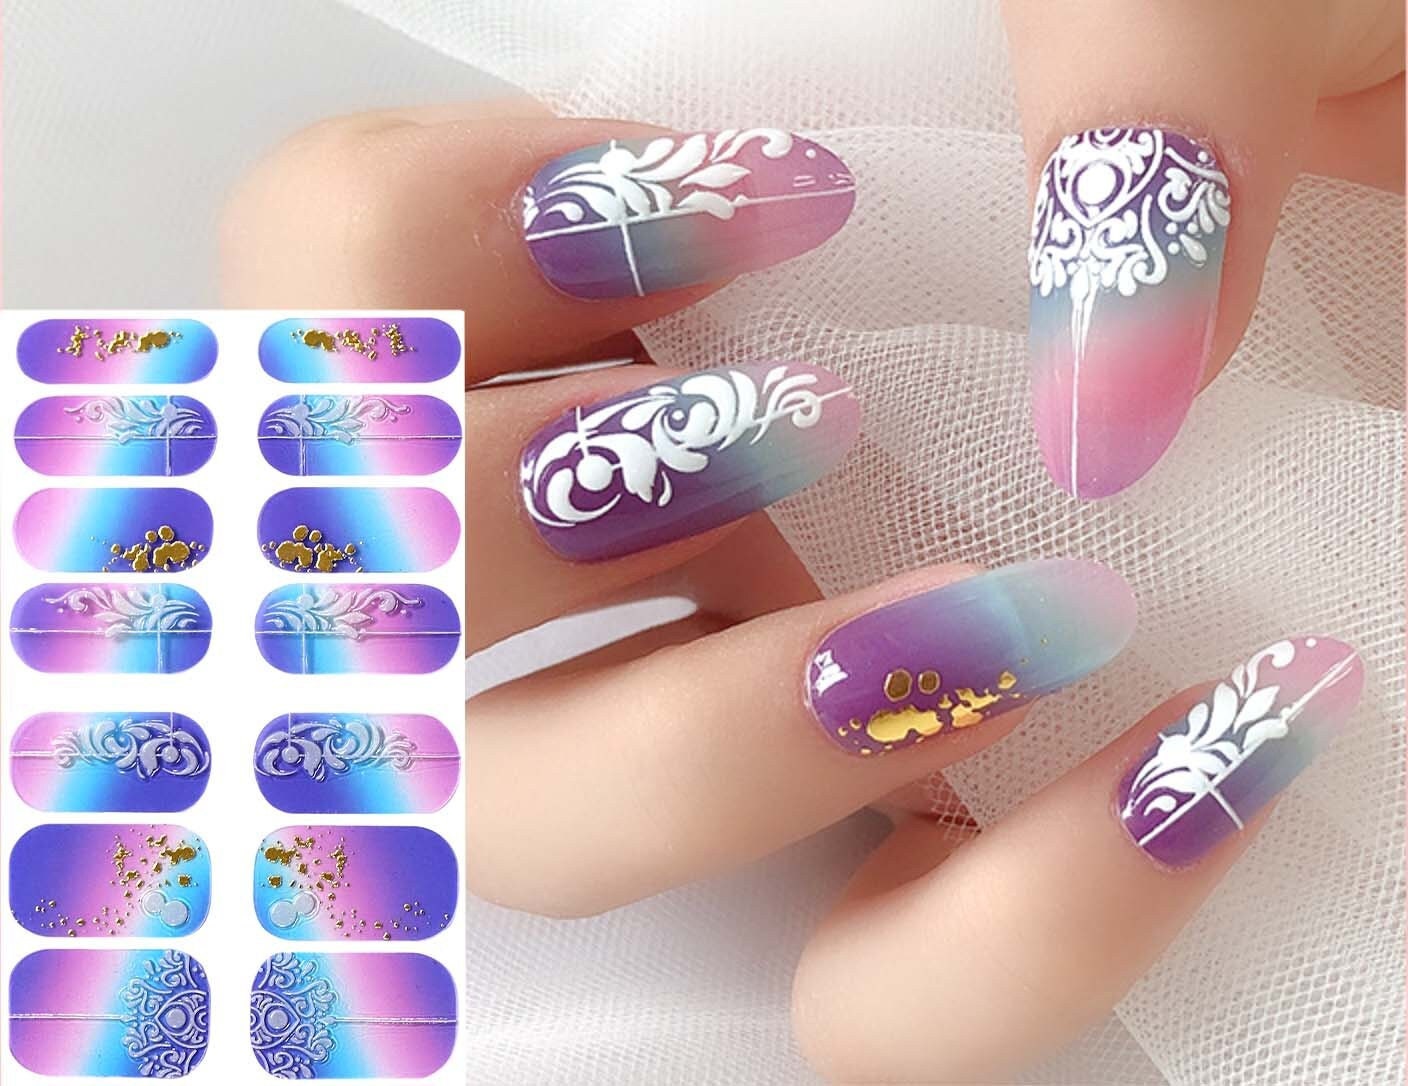 12 Melbourne Nail Salons With Next-Level Nail Art